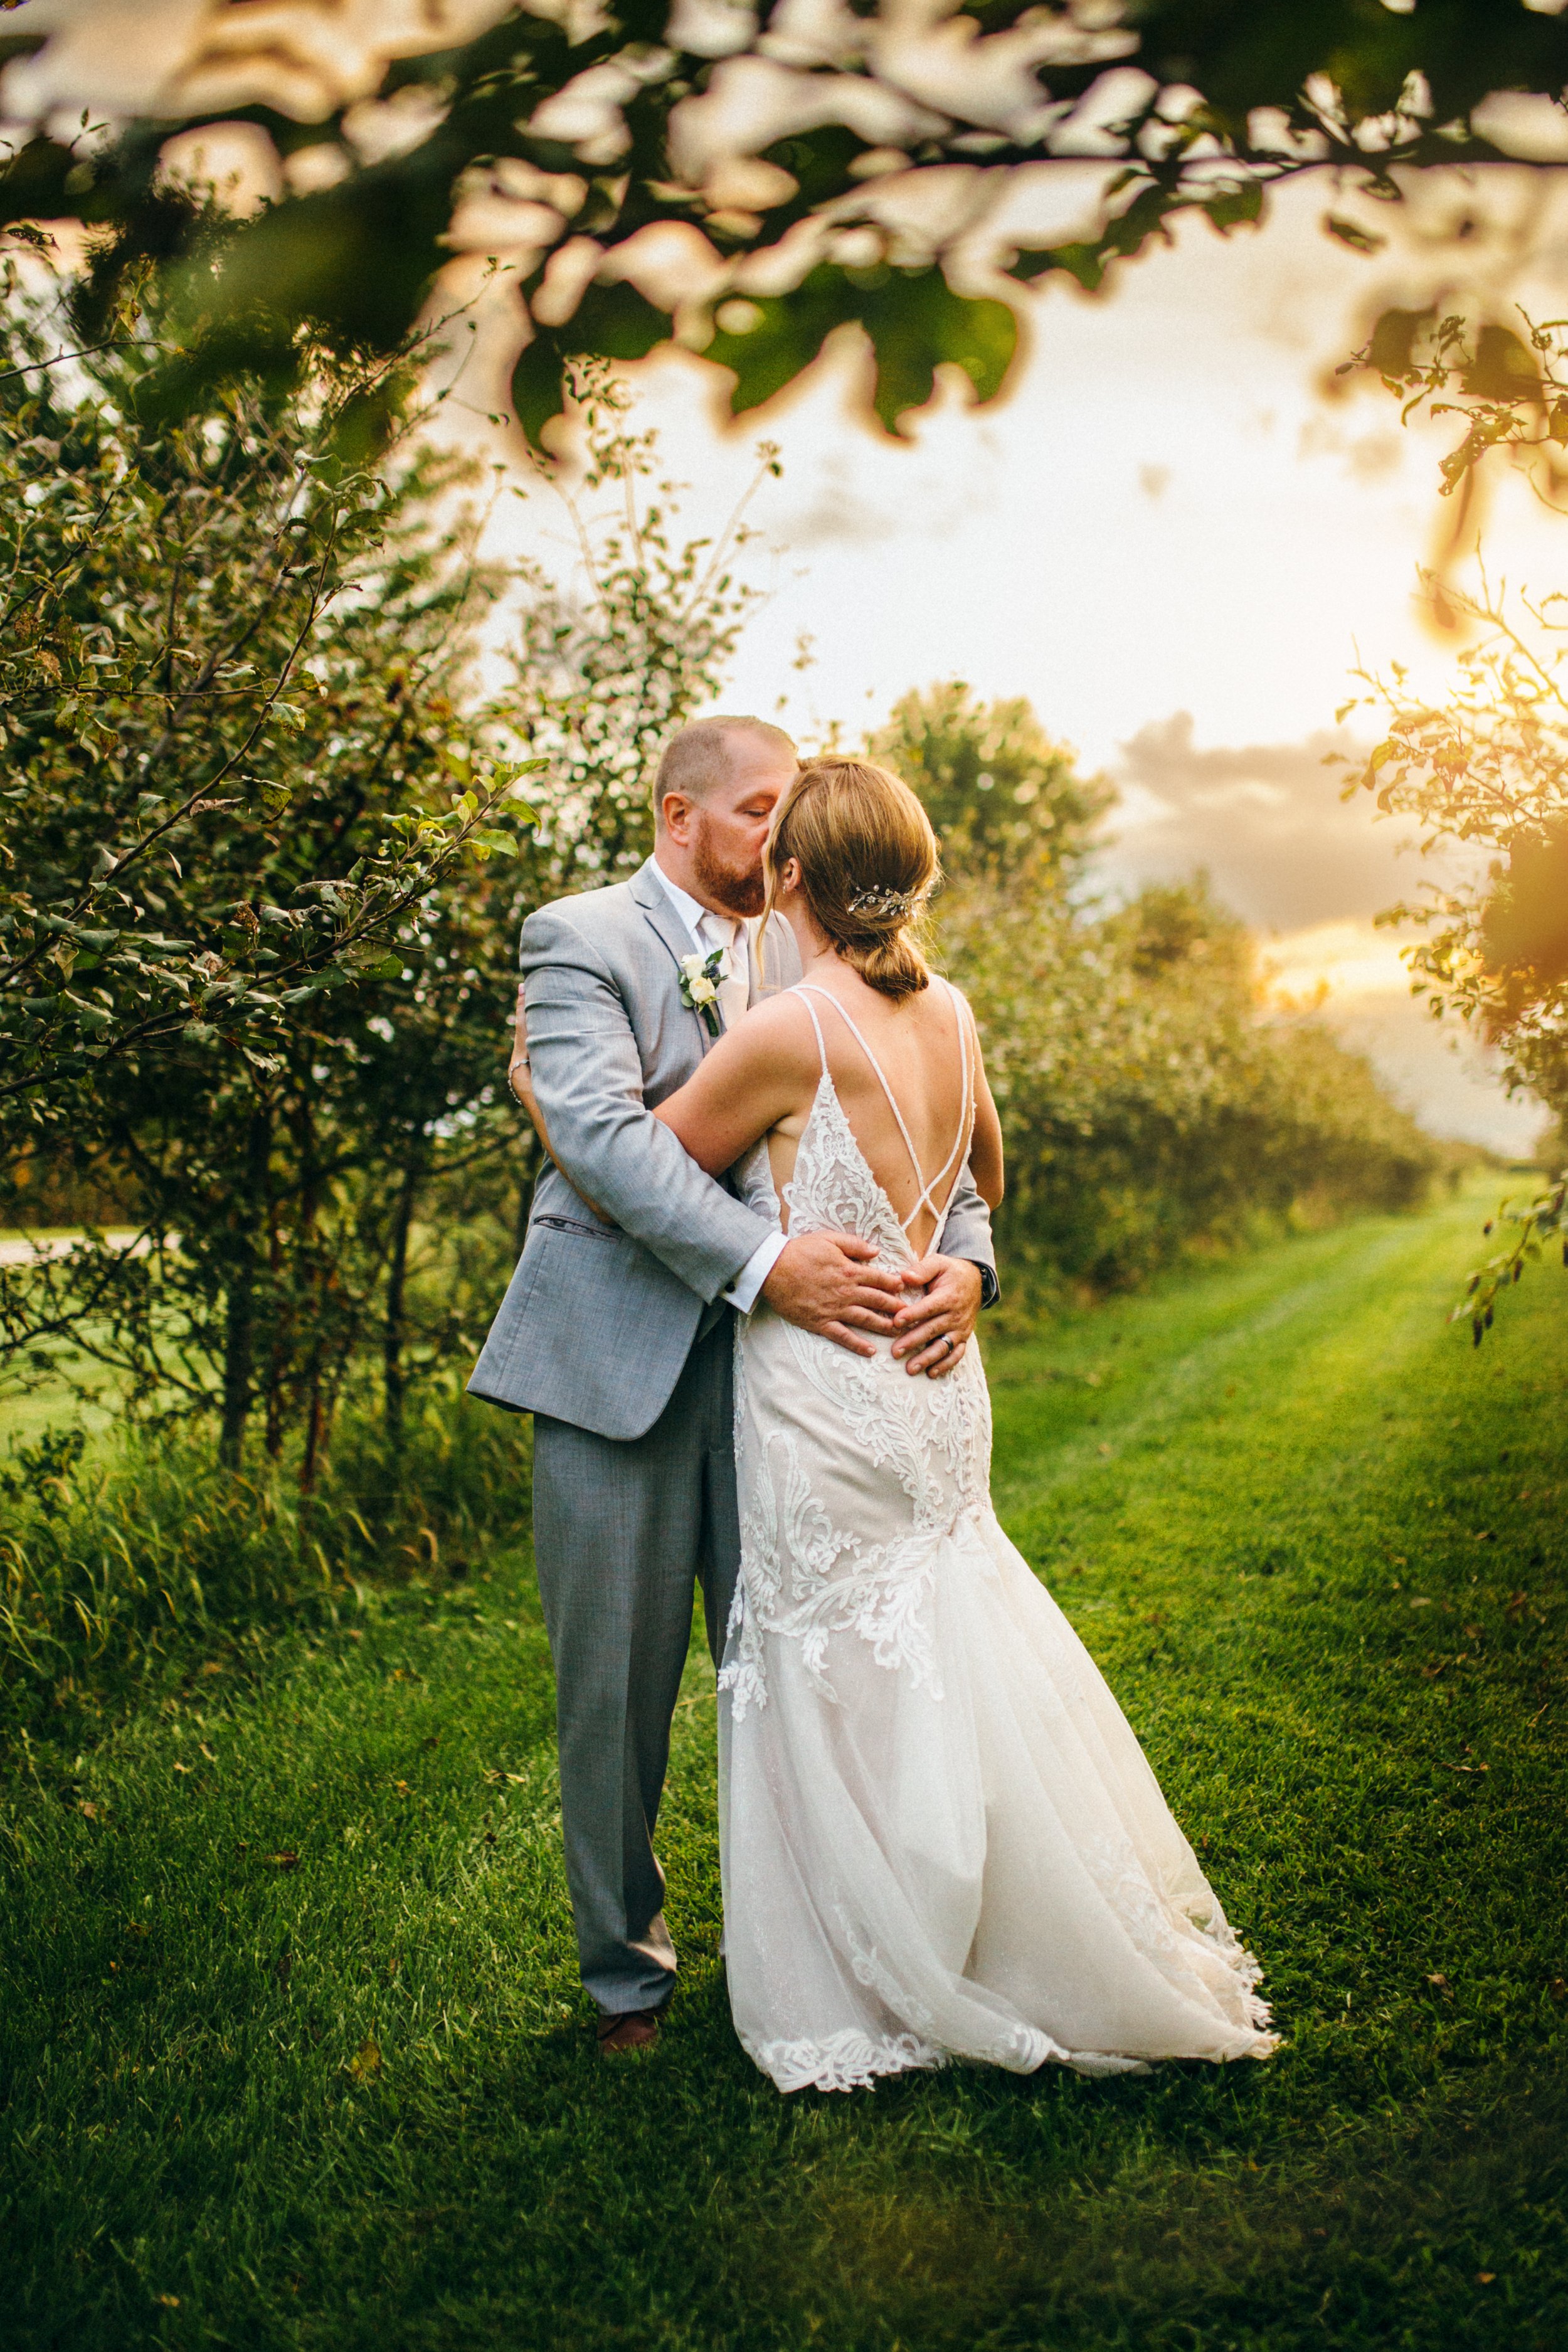  In an orchard at sunset, a bride and groom are caught kissing by wedding photographer Teala Ward Photography. summer wedding Illinois #TealaWardPhotography #IllinoisValleyPhotographer #summerwedding #TealaWardWeddings #Illinoisweddings  